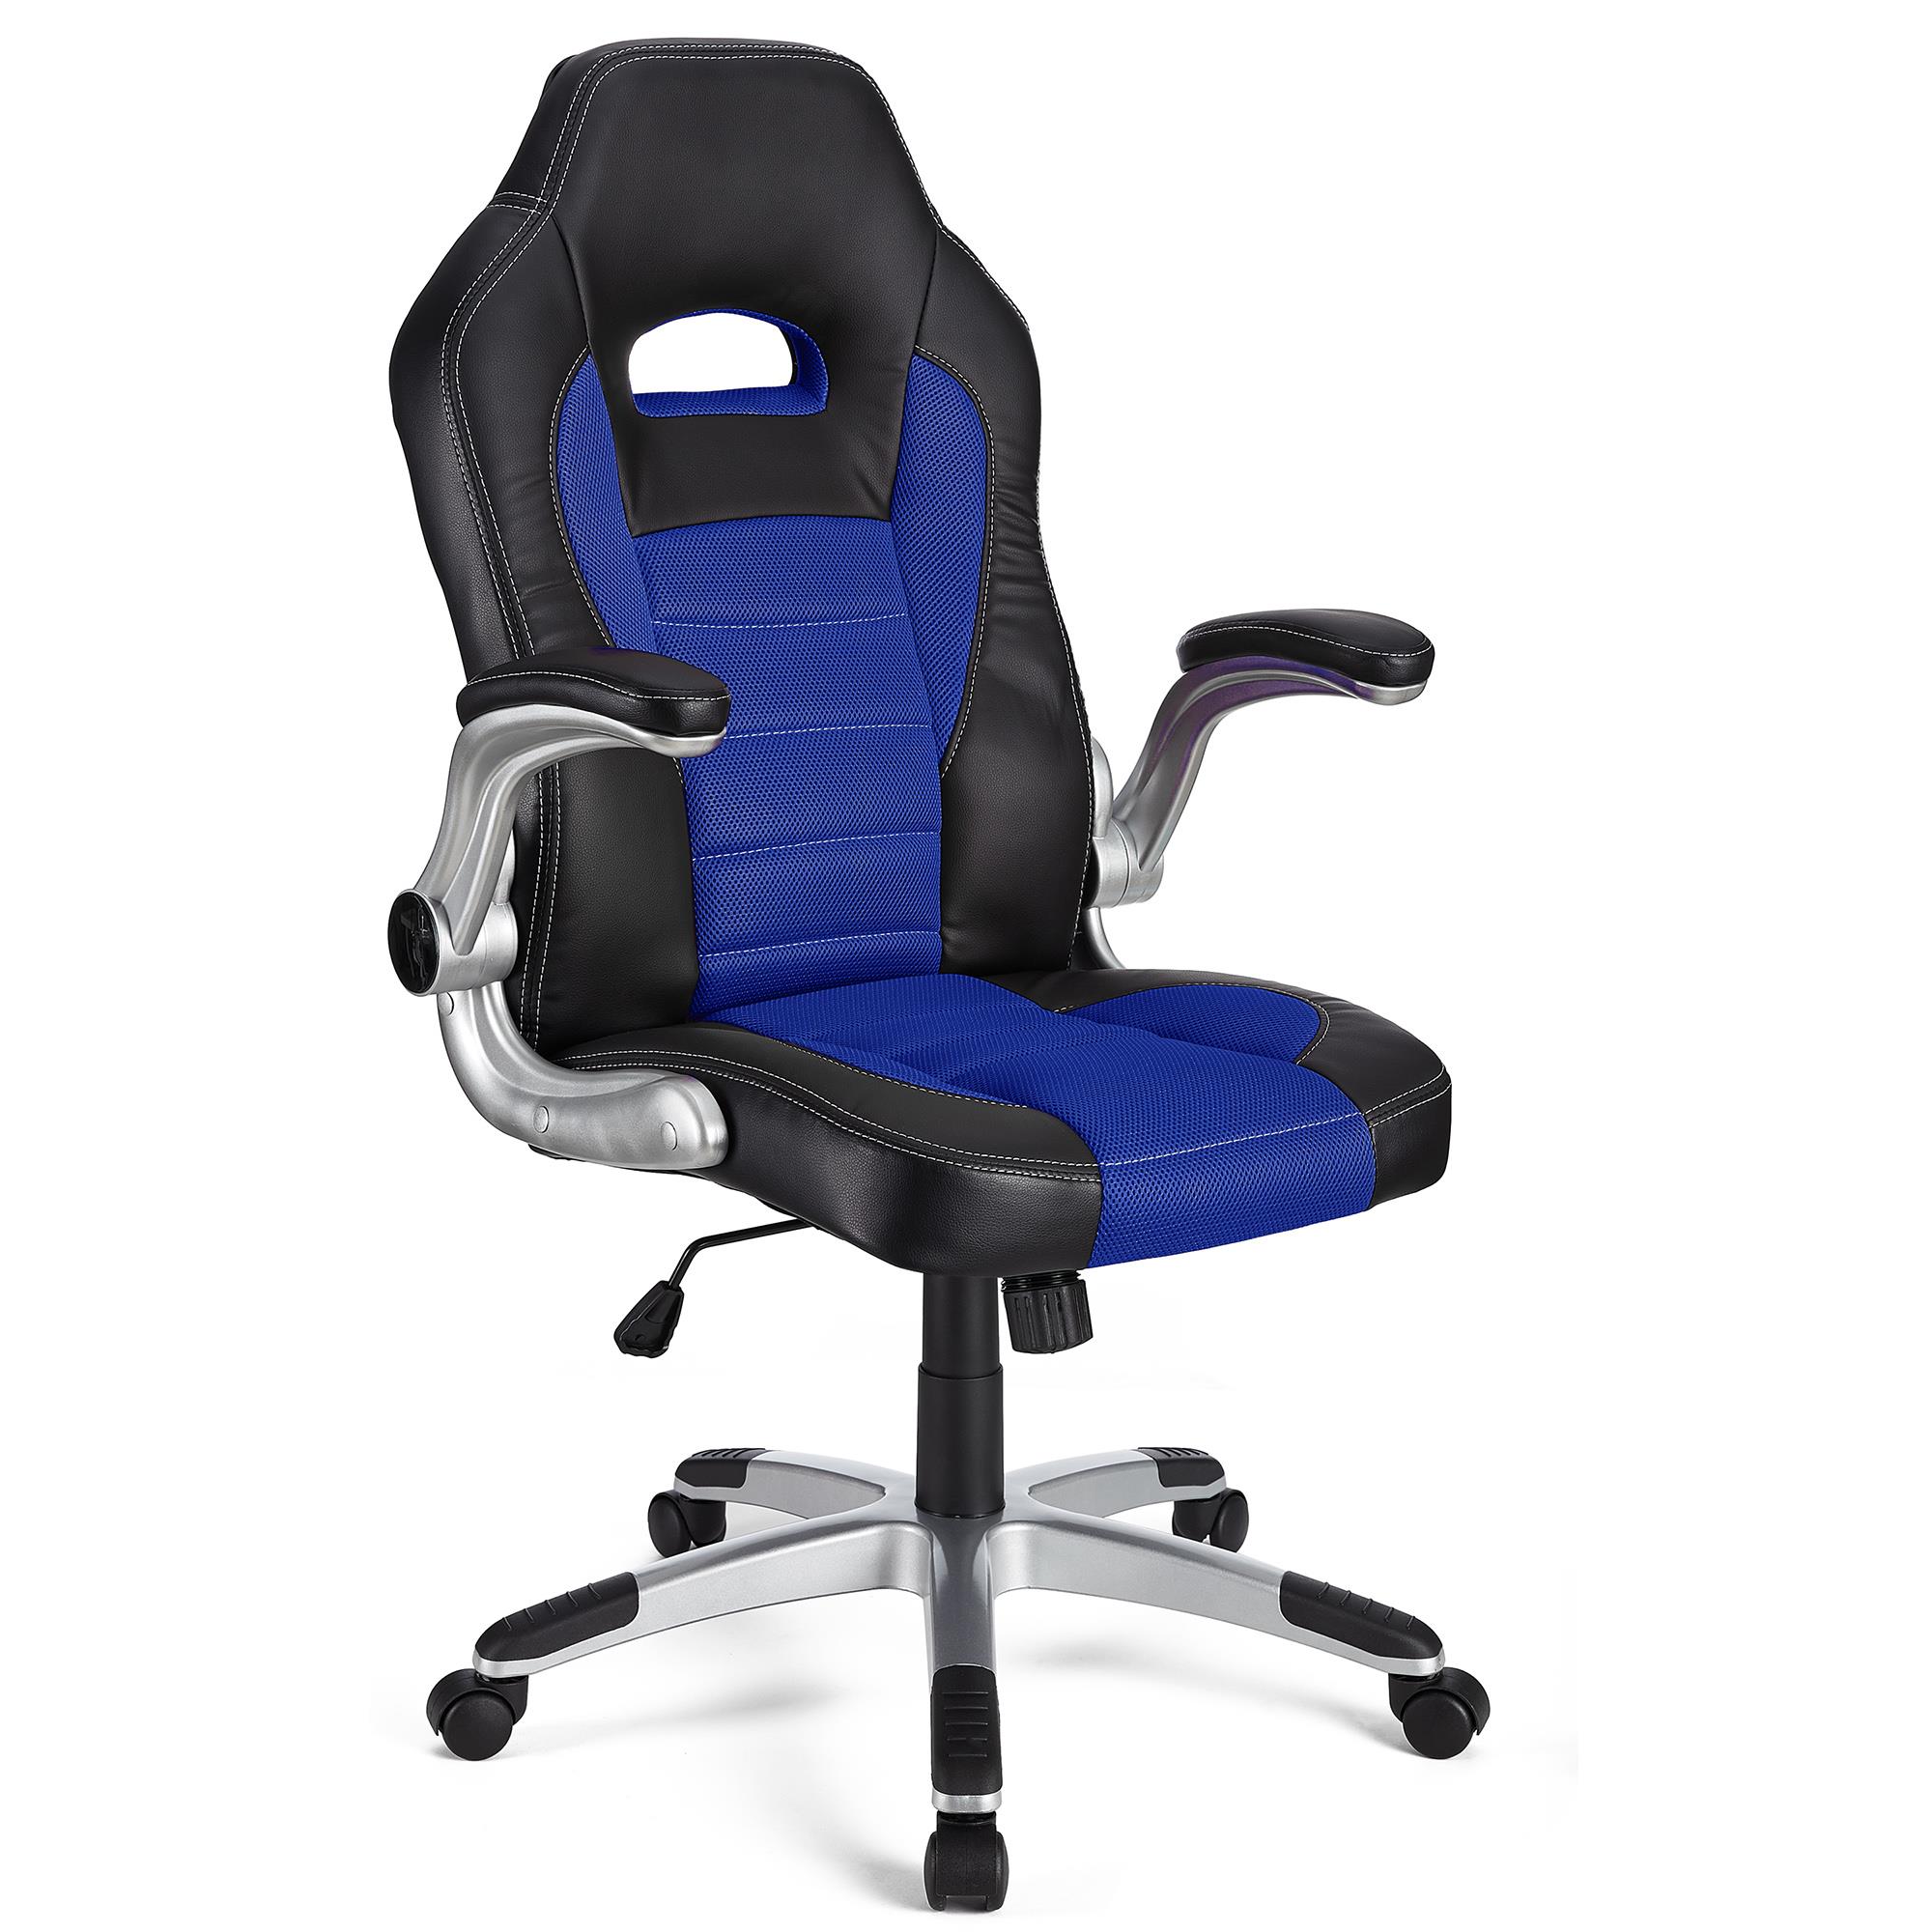 Chaise Gamer LOTUS, accoudoirs relevables, cuir et maille respirable, bleu